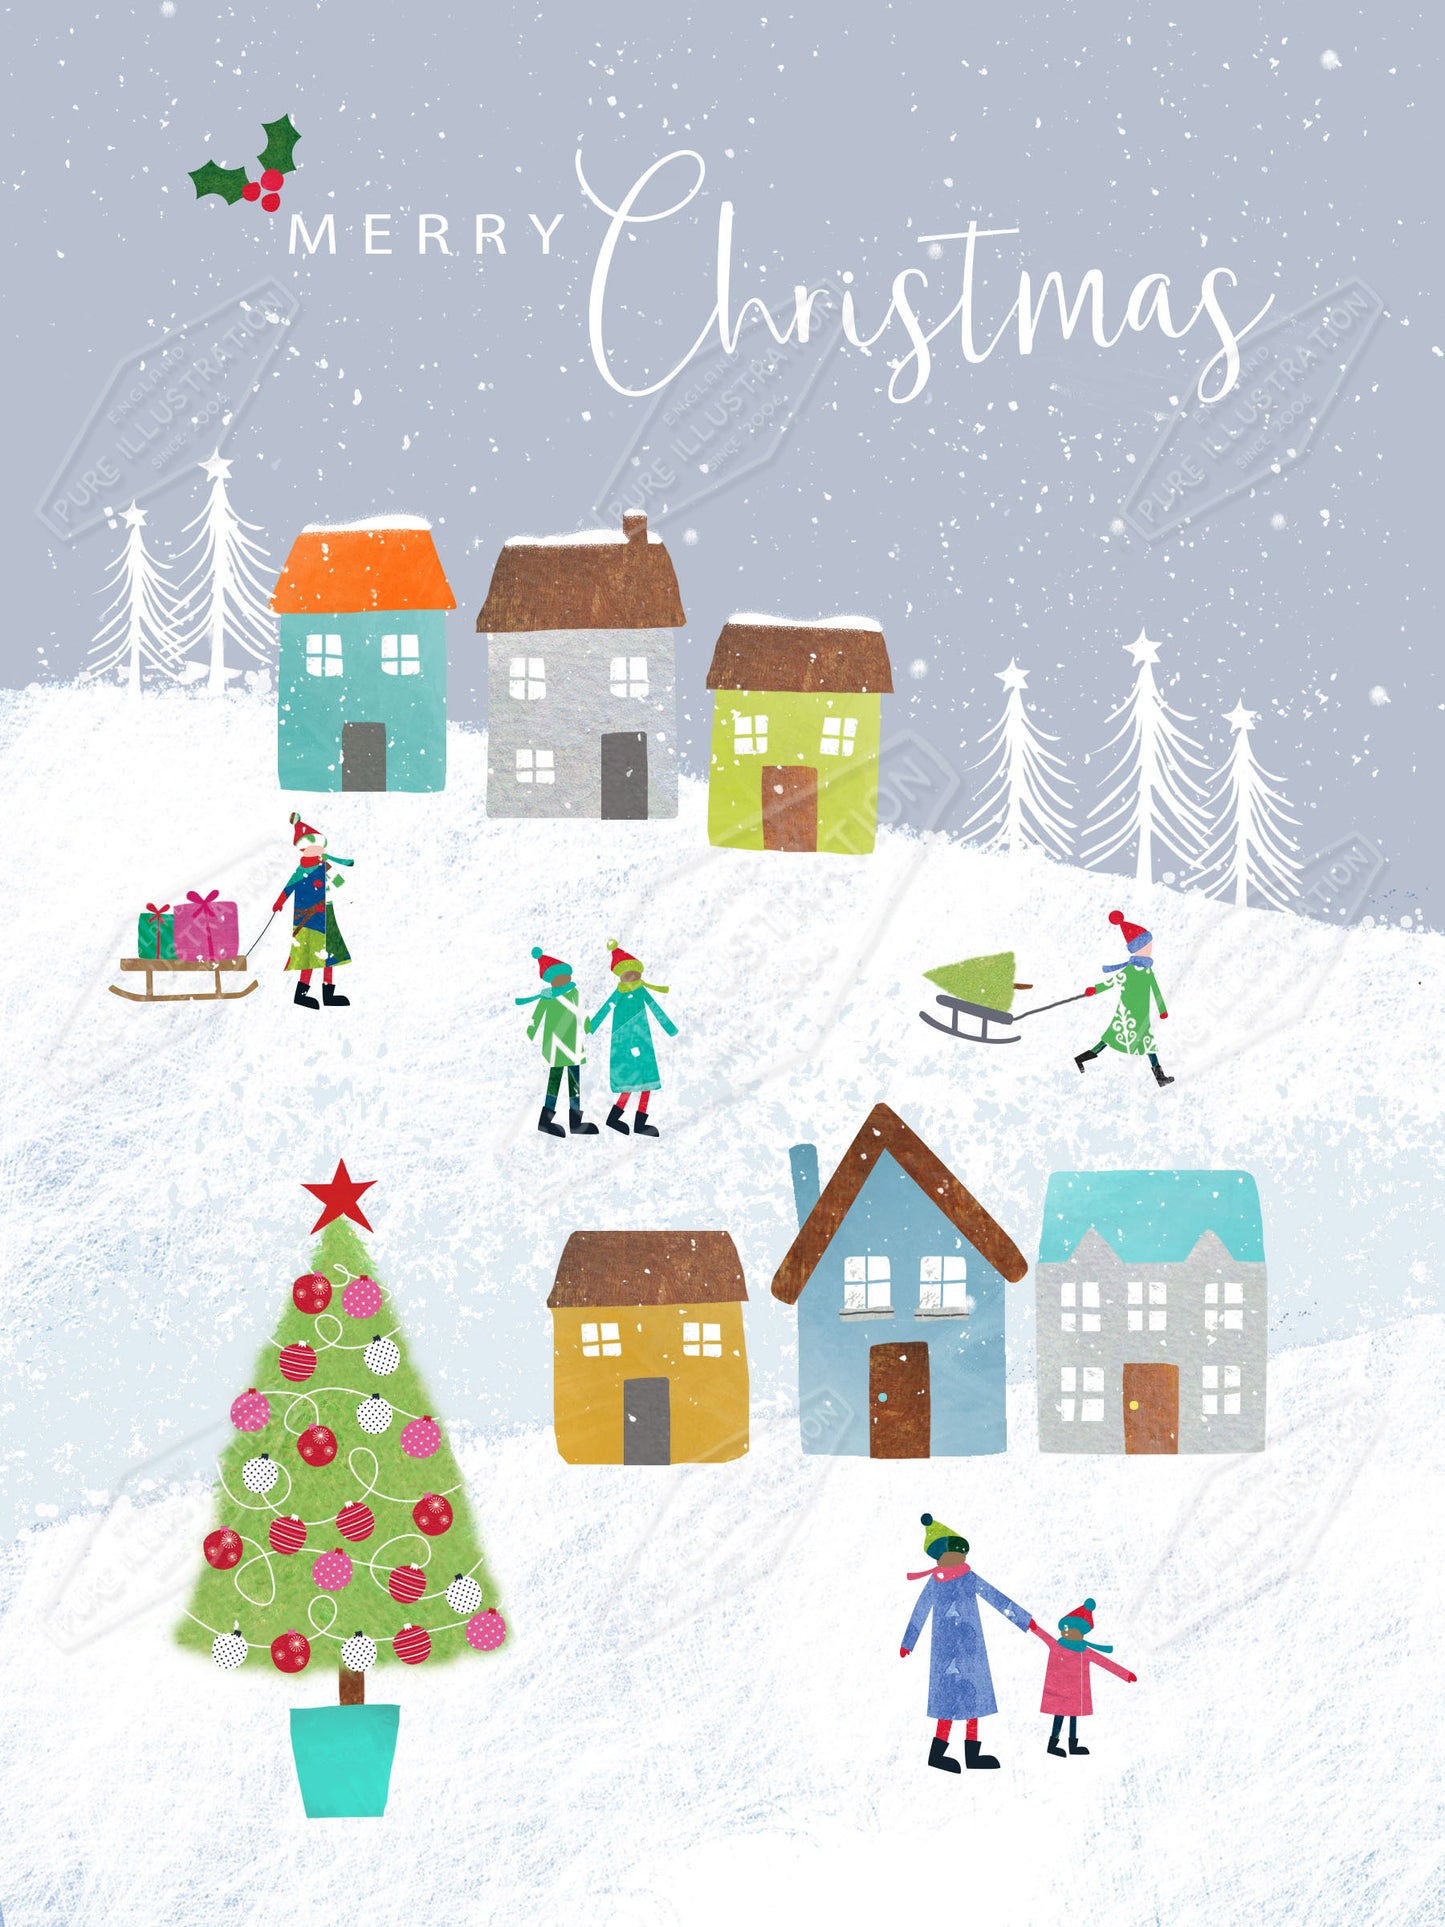 00035073IMC- Isla McDonald is represented by Pure Art Licensing Agency - Christmas Greeting Card Design